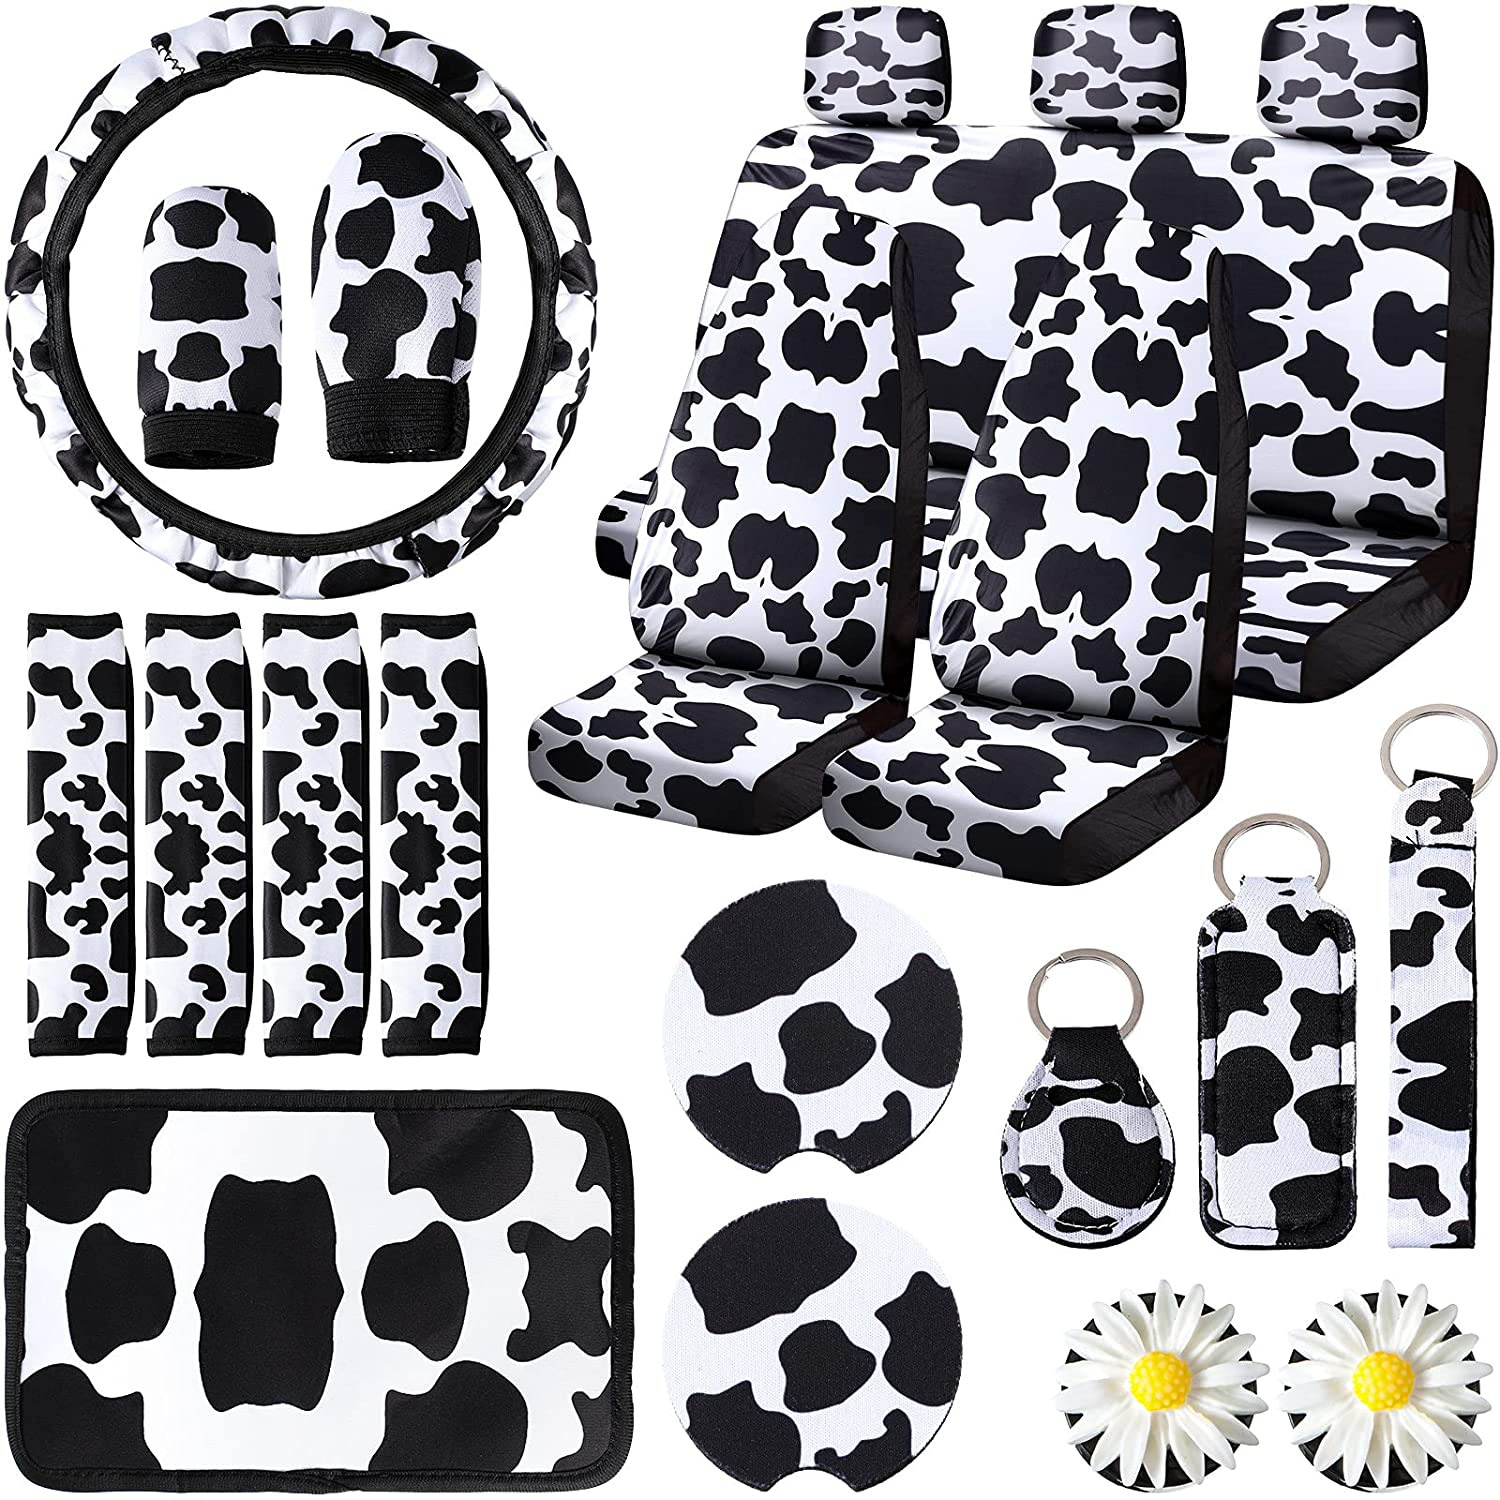 22 Pieces Cow Print Car Accessories Set Cow Car Seat Cover Steering Wheel Cover 